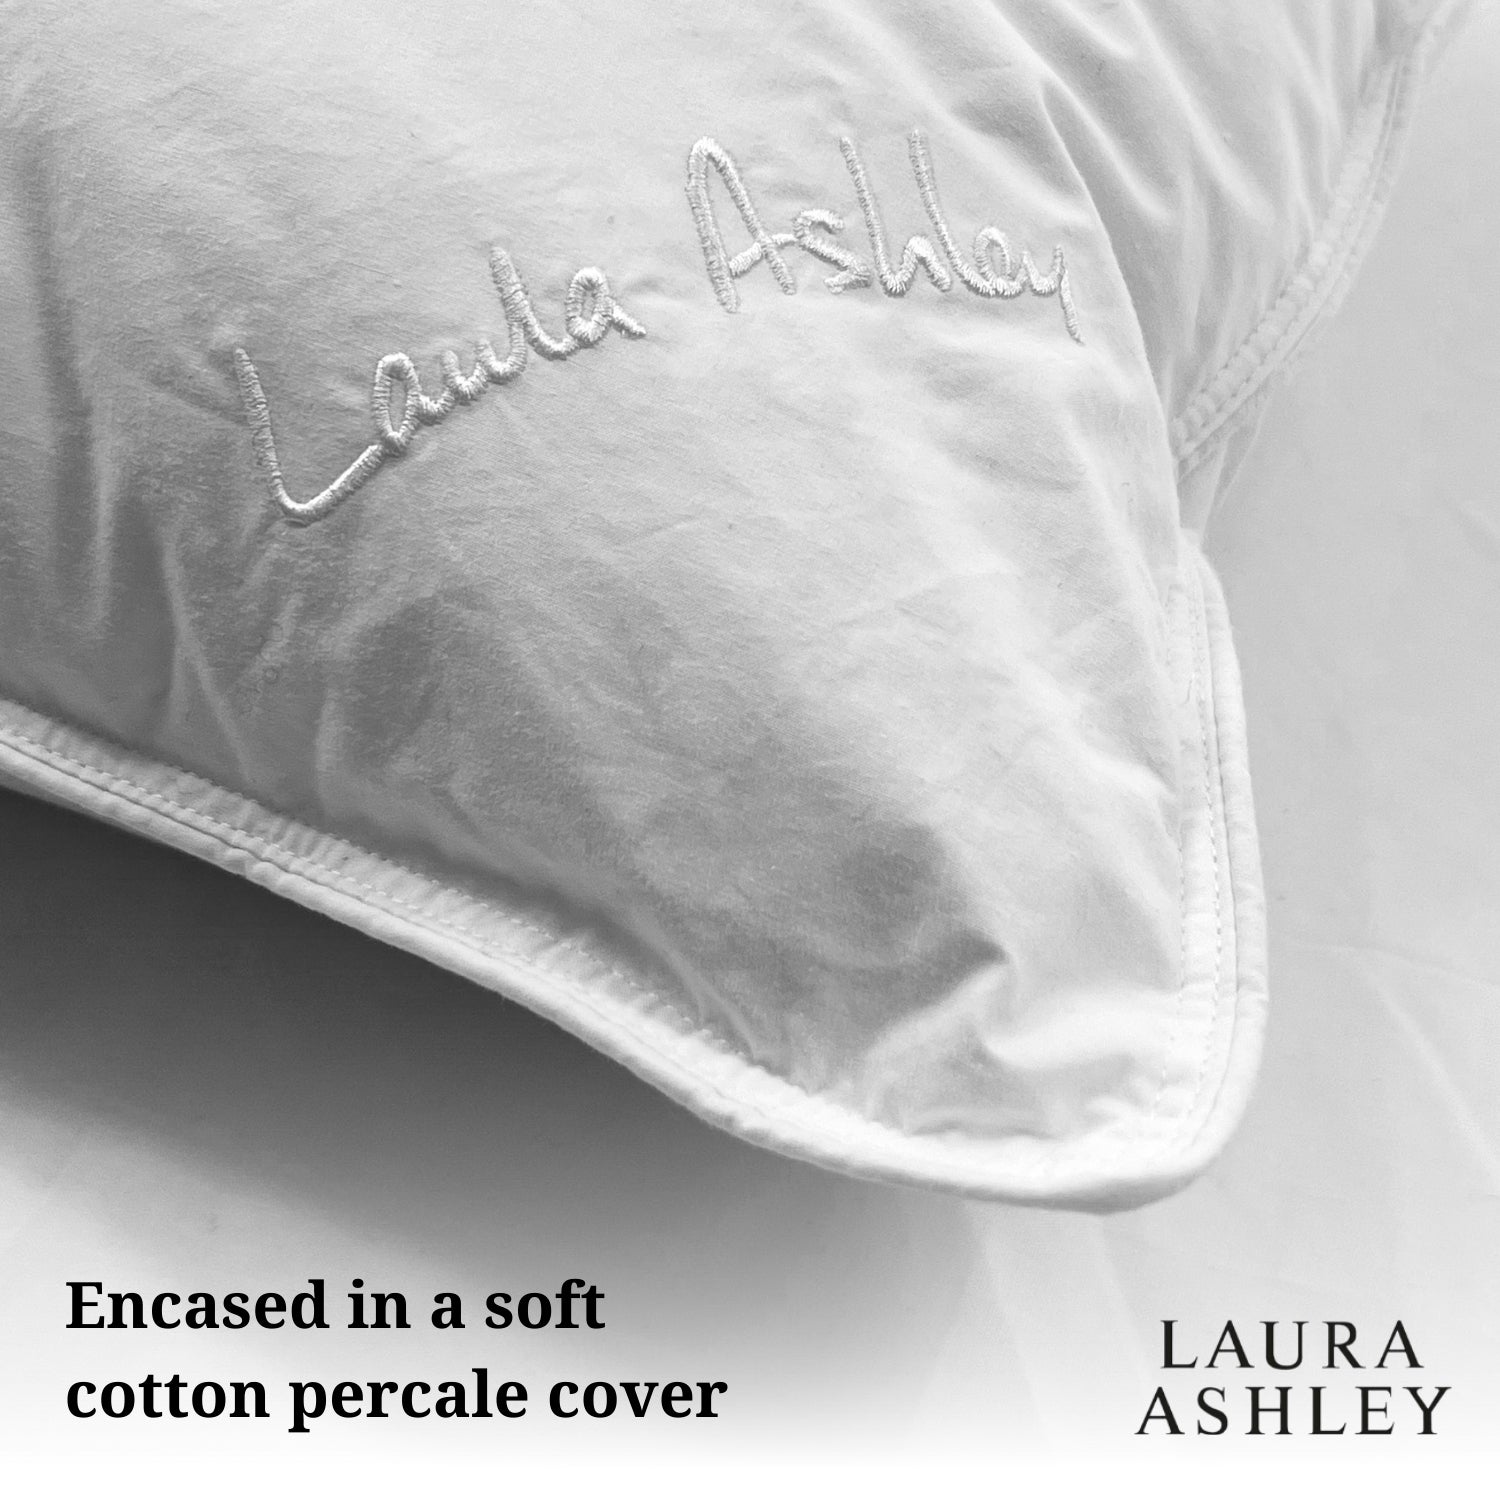 Laura Ashley Soft As Down Pillow in its soft cotton cover 